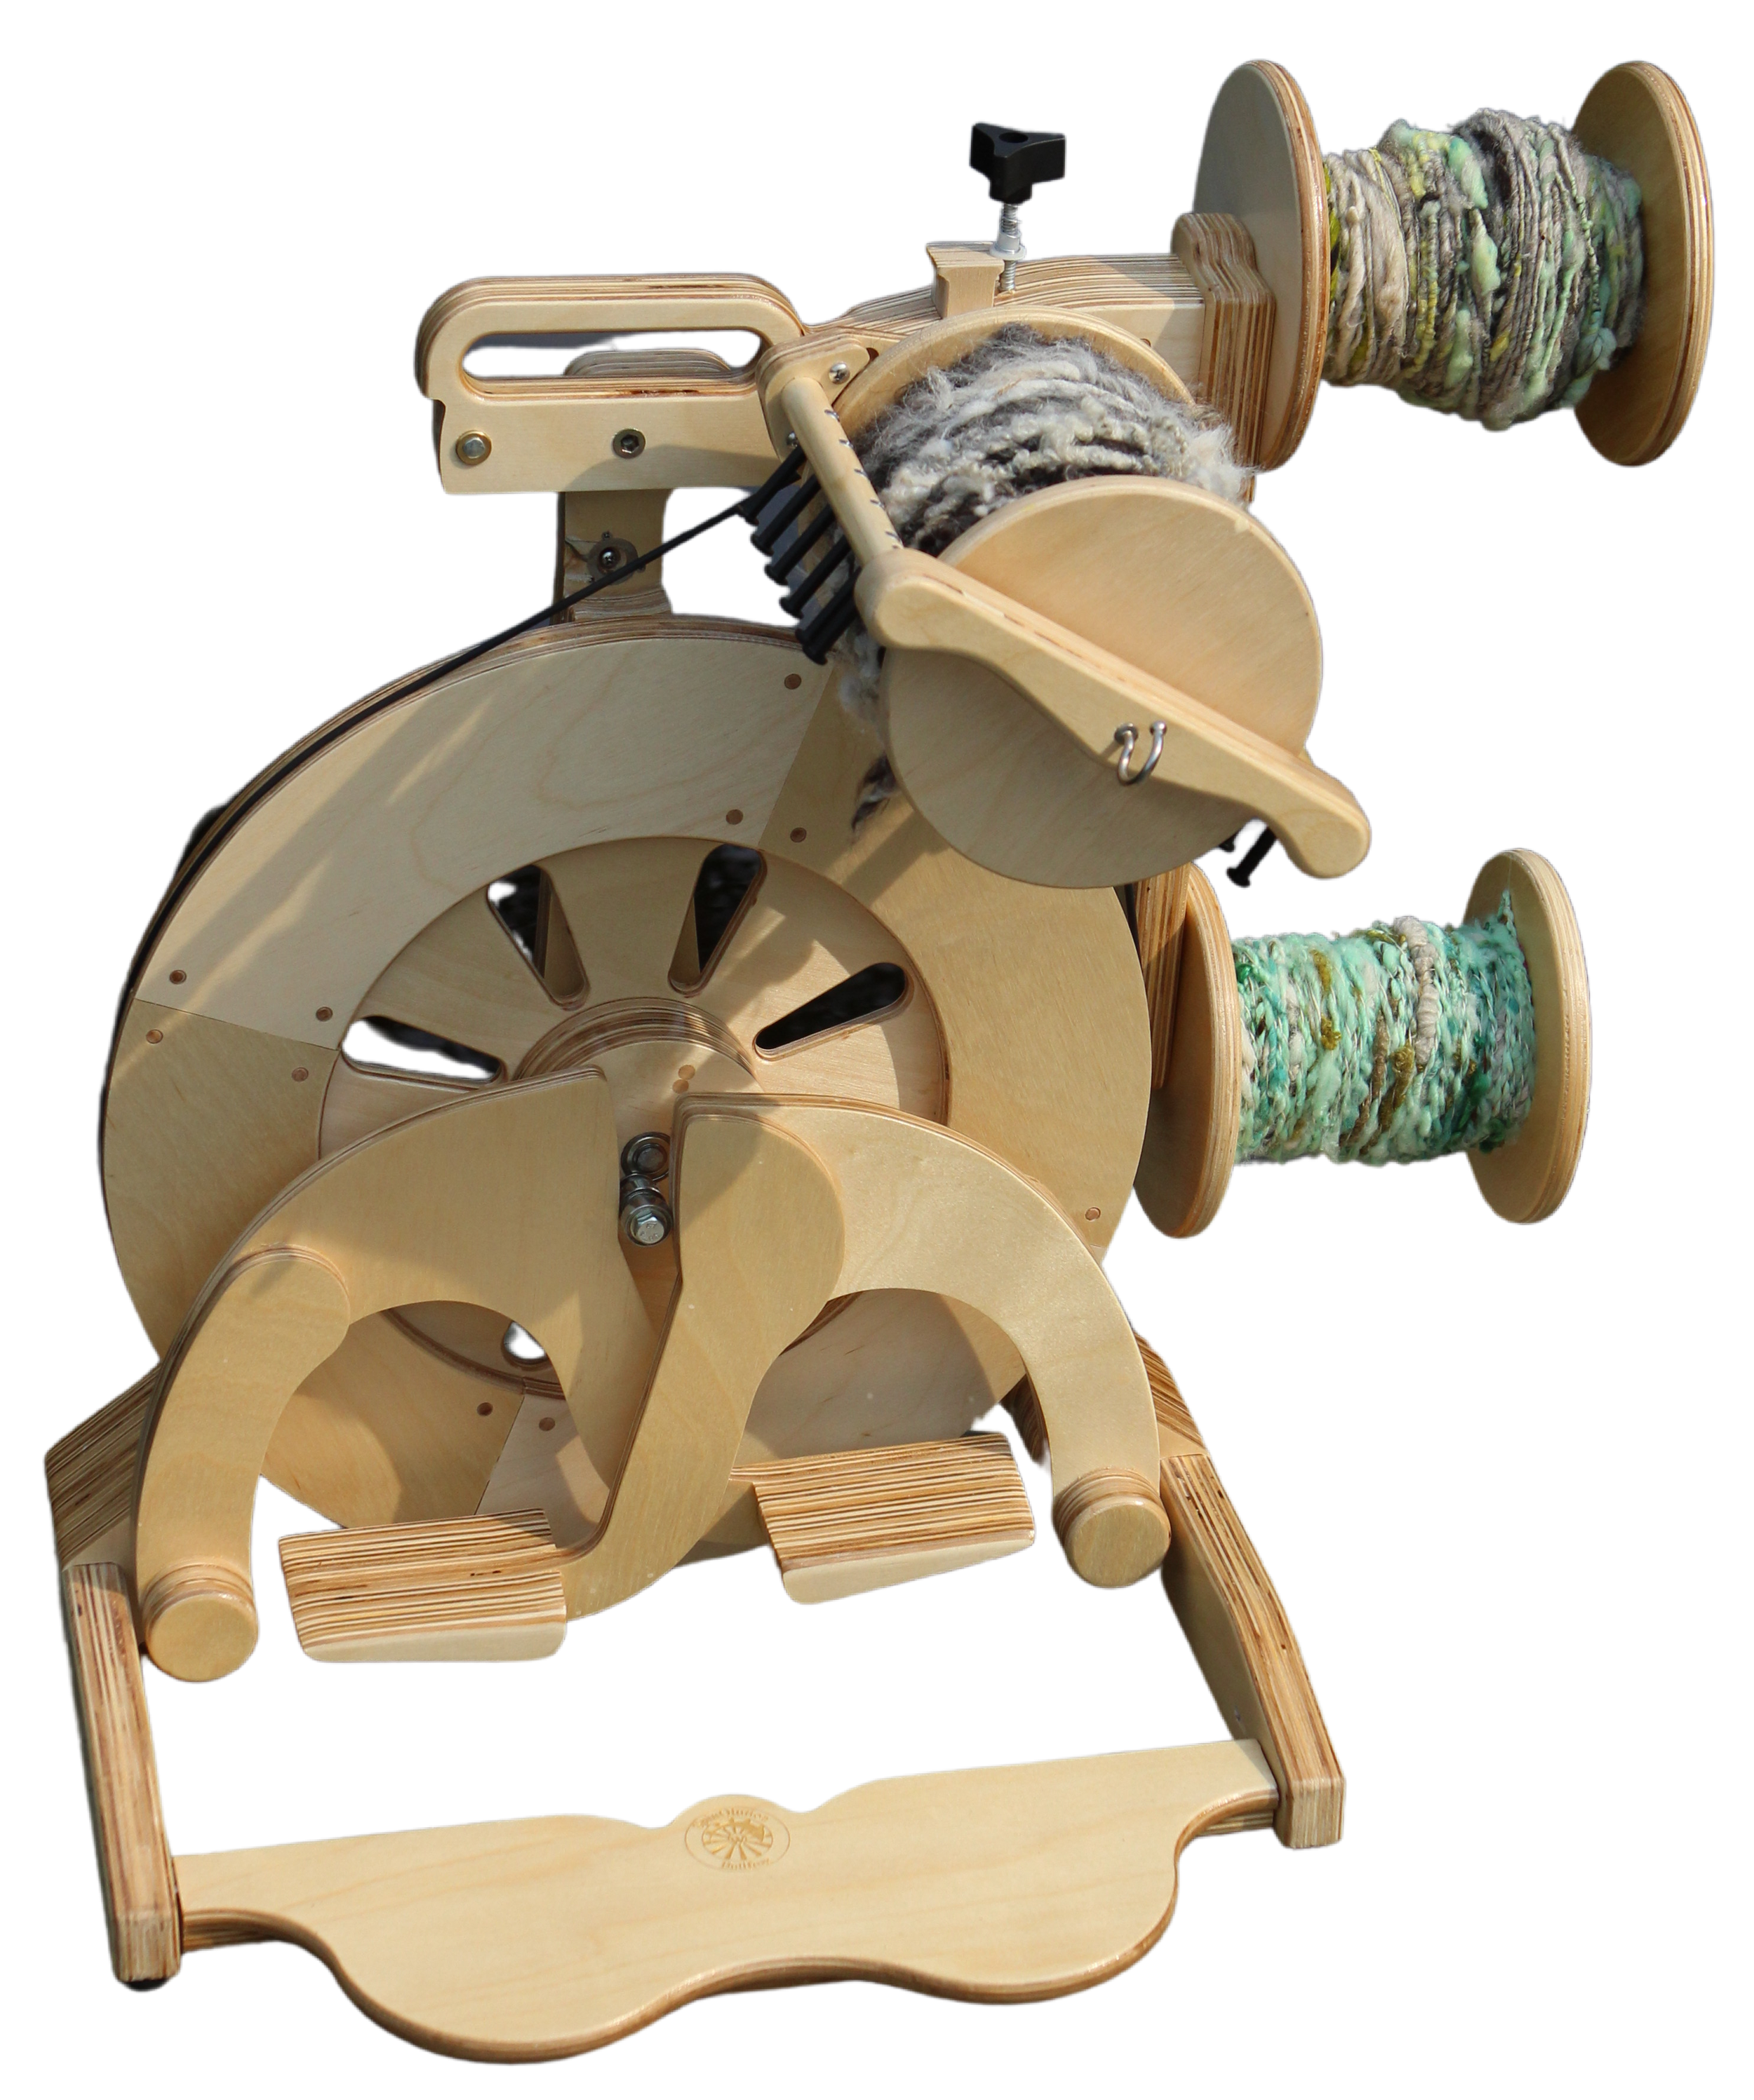 SpinOlution Spinning Wheels: Bullfrog Portable Bulky Art Yarn Spinning Wheel  — SpinOlution Spinning Wheels made in the Pacific Northwest, USA. Veteran  Owned.